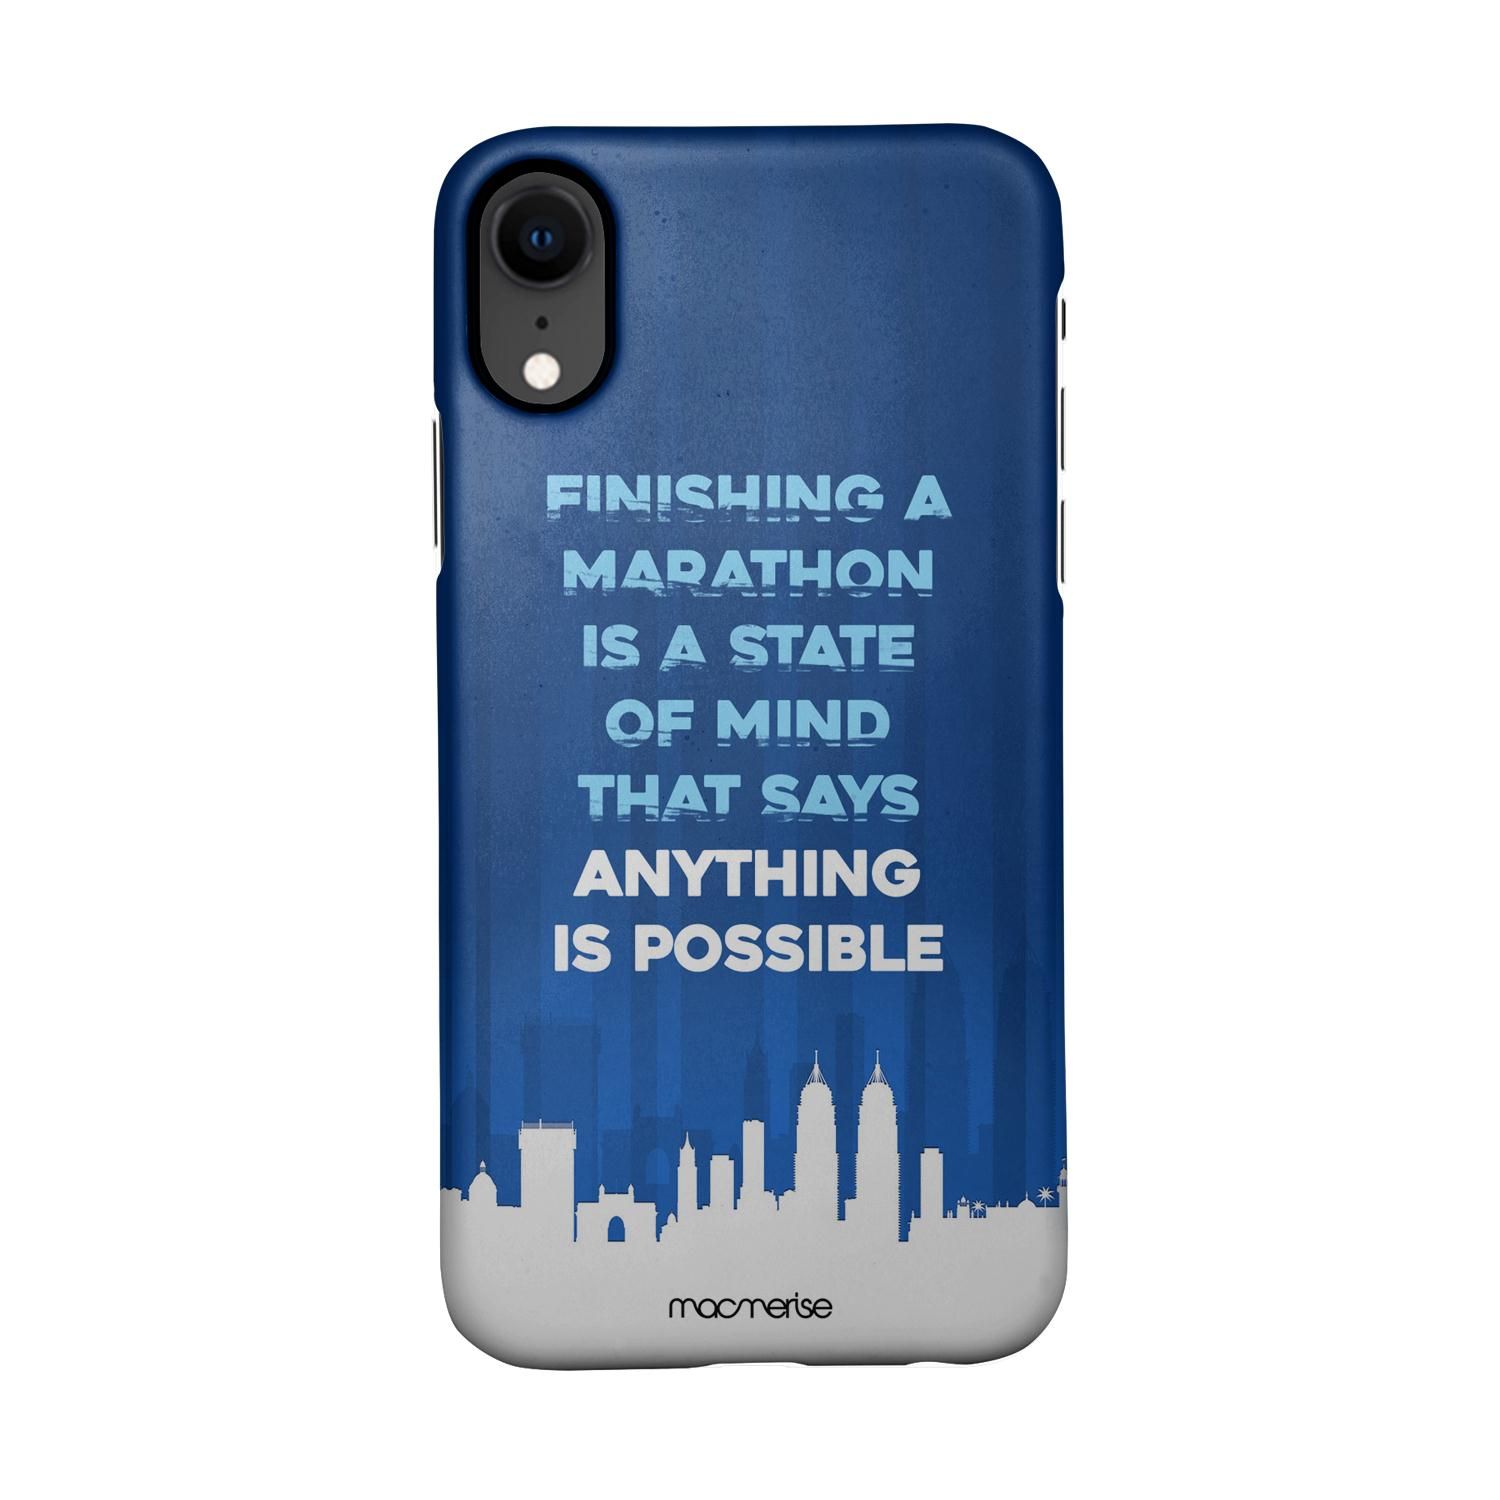 Buy Anything Is Possible - Sleek Phone Case for iPhone XR Online